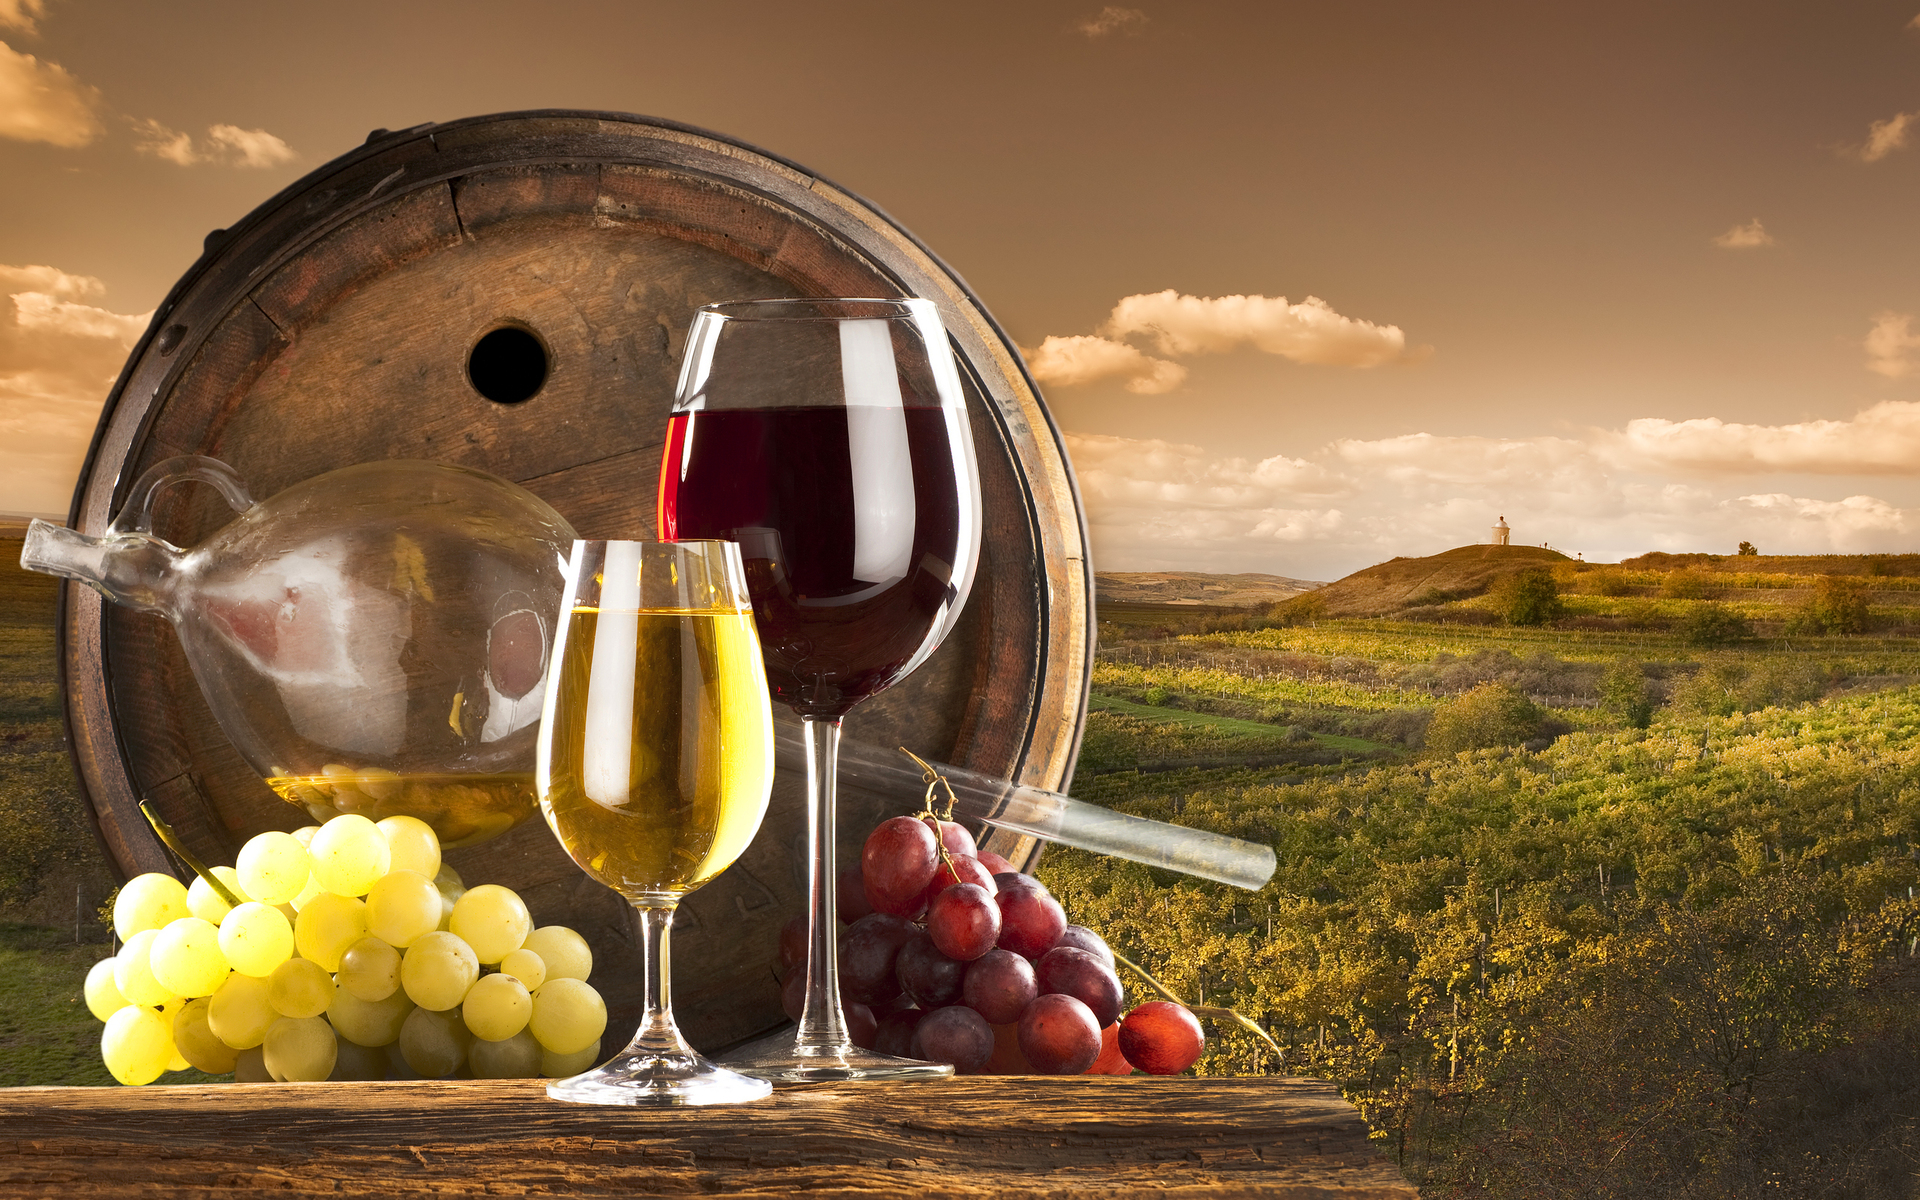   71297617stock photo red and white wine with barrel on vineyardhtml